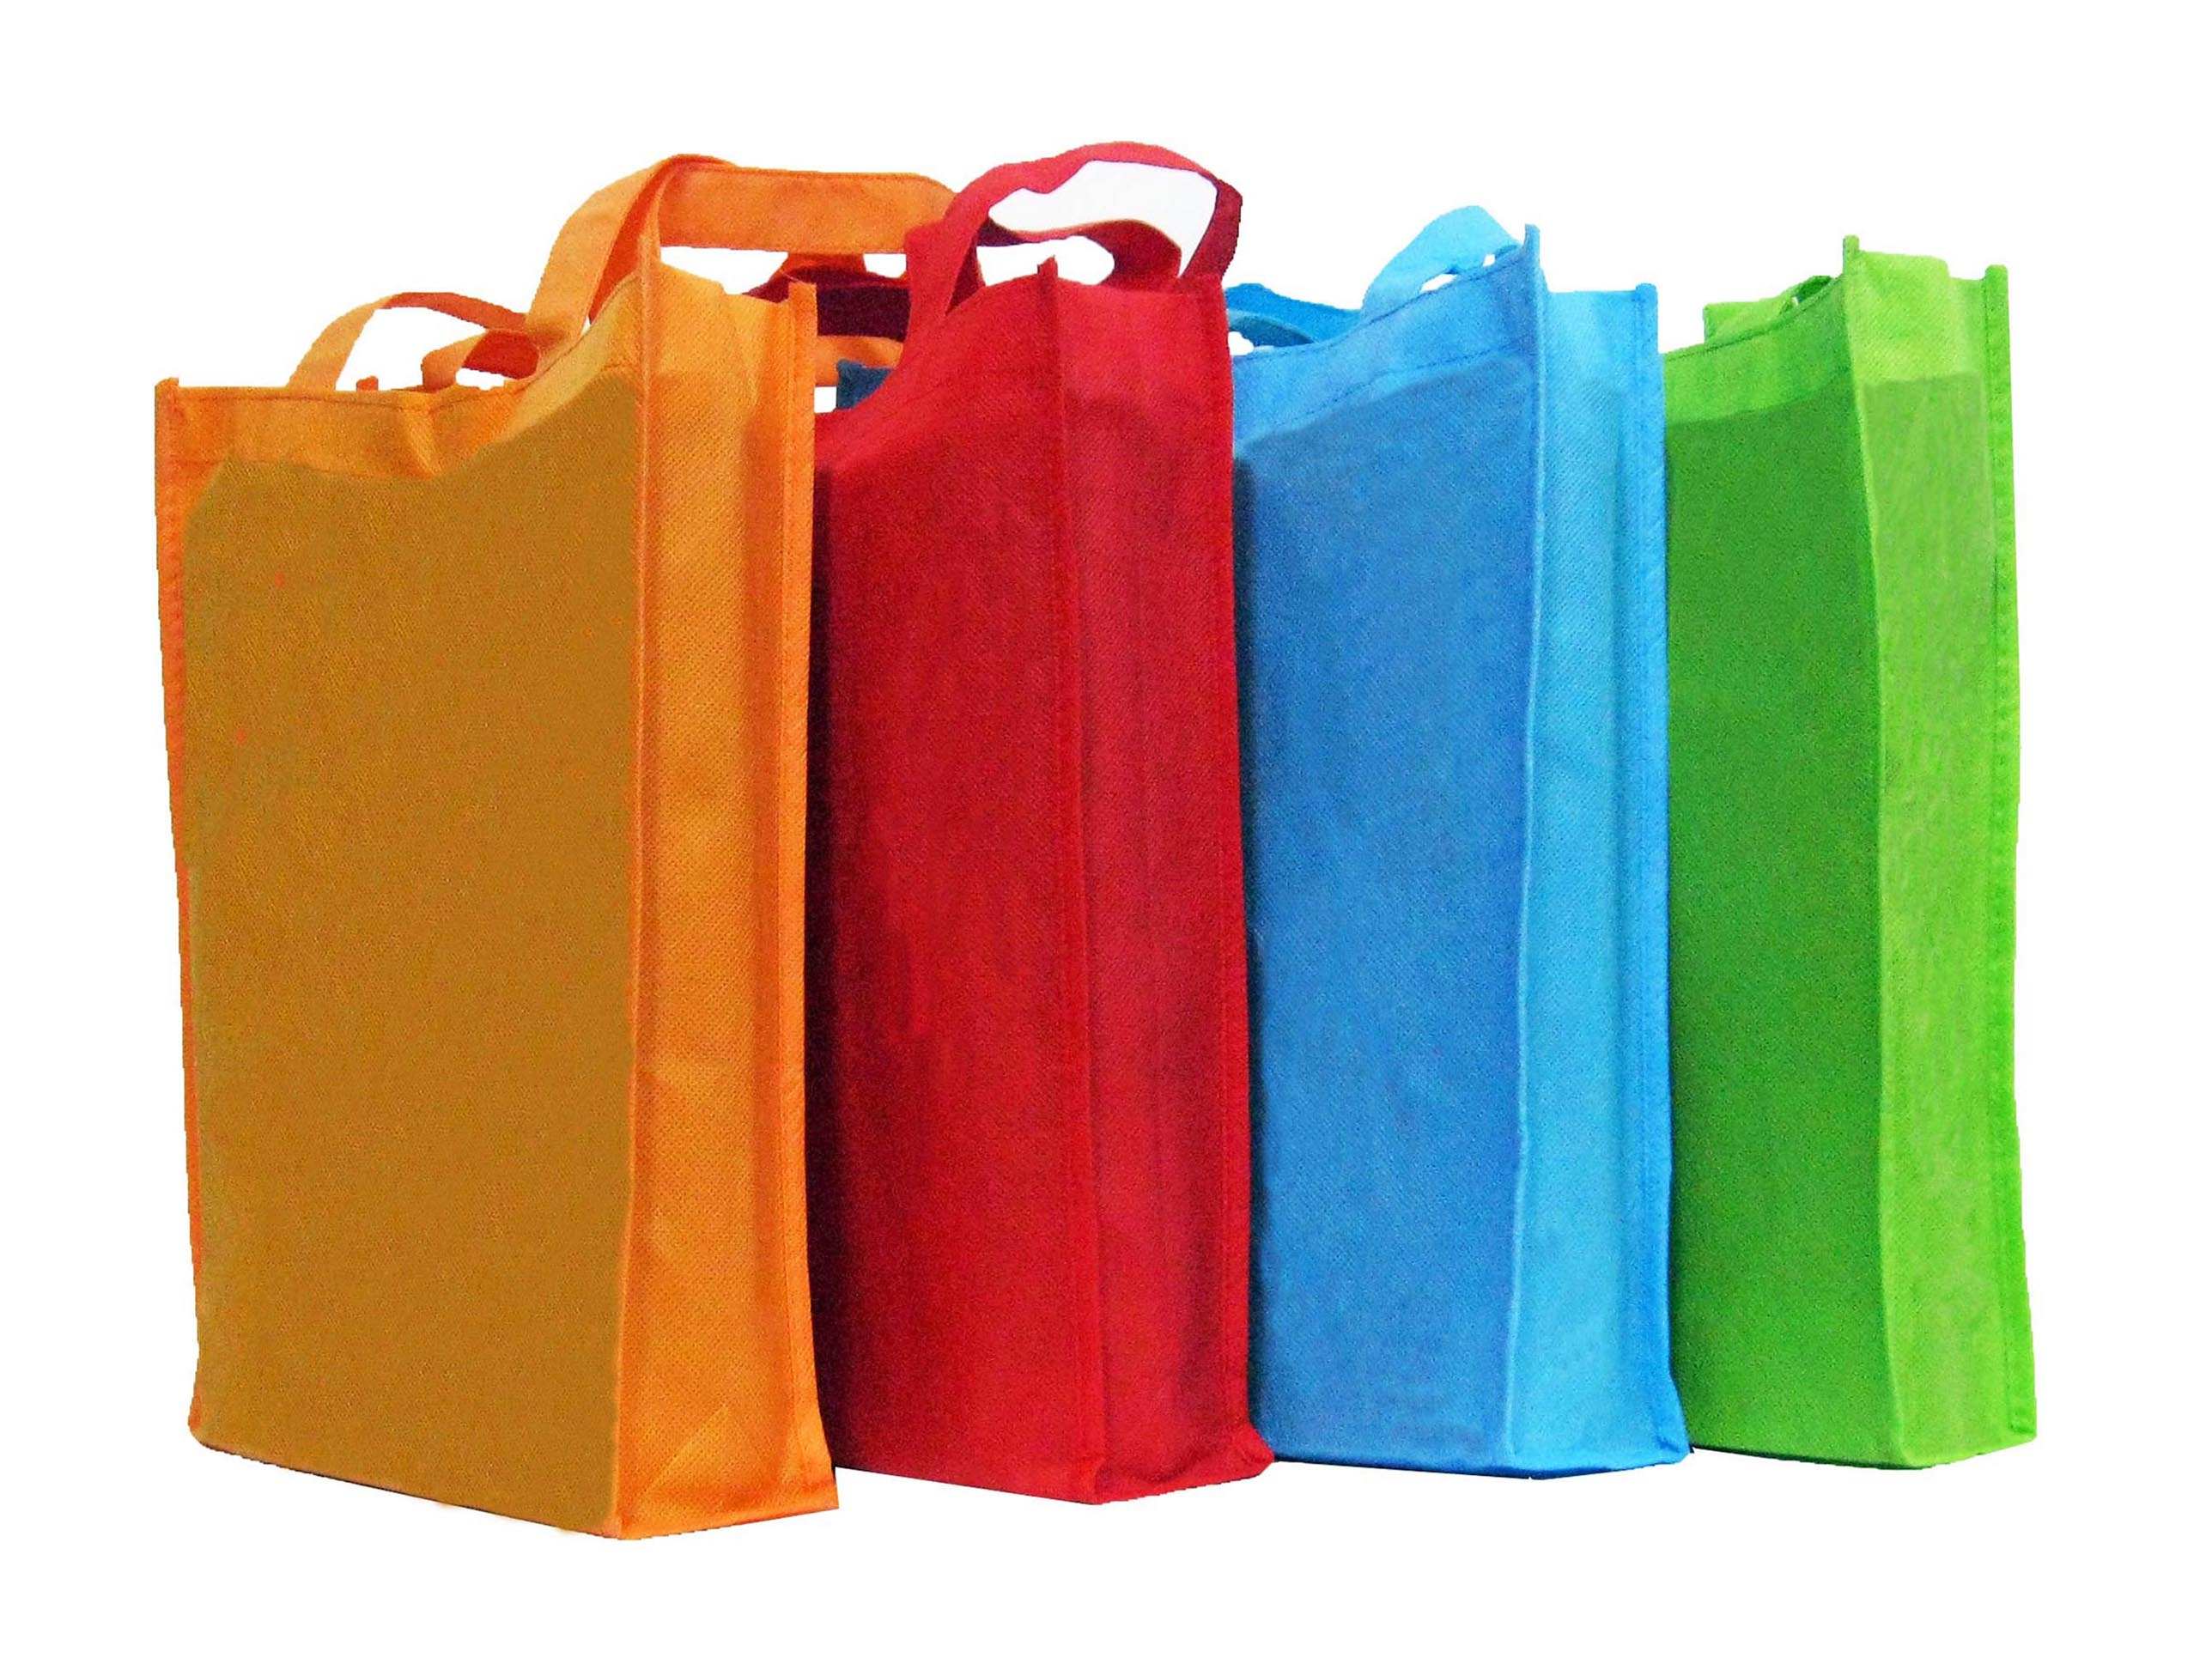 Non-Woven Bags Manufacturing Unit for Sale in Patna, Bihar
